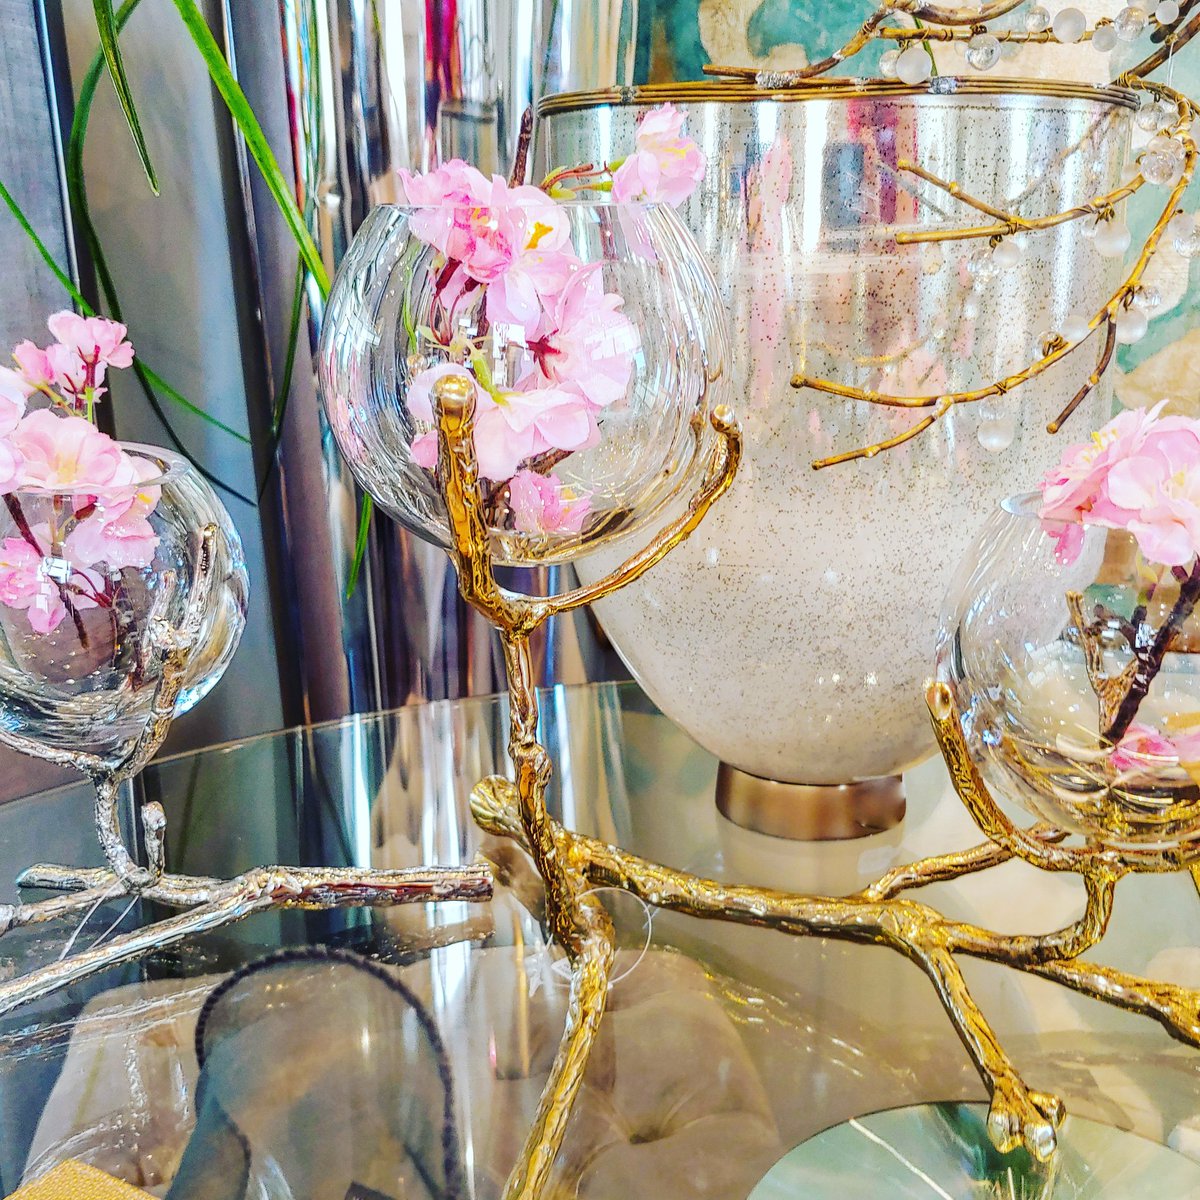 We love pieces like this that you can add your own creative spin to. What would you put in these elegant accent pieces?
#creativedesign #modernaccents #inspiredbynature #candleholders #vases #branches #glassaccents #centrepieceideas